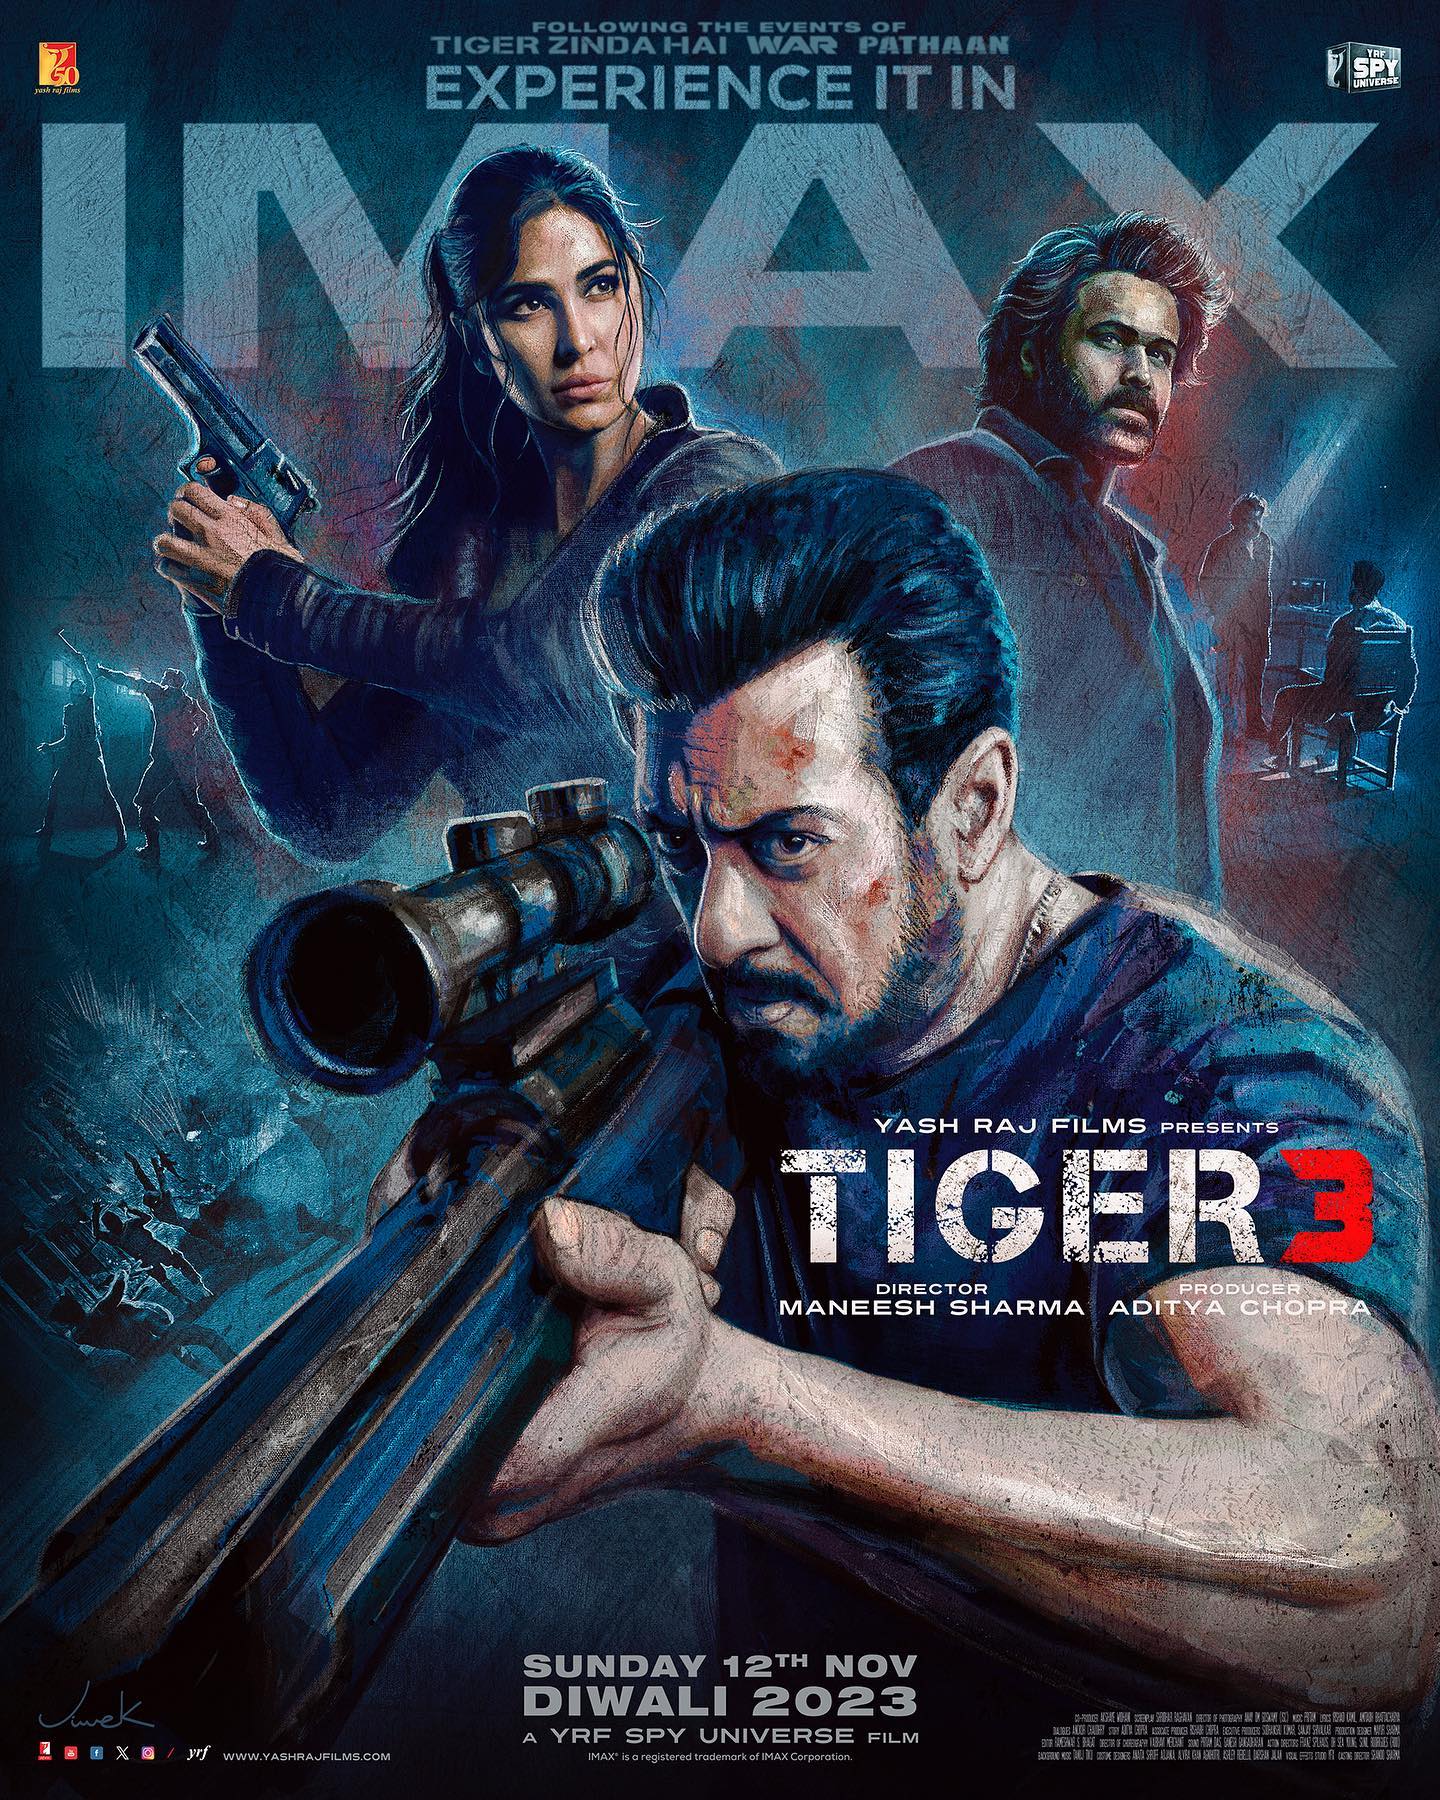 tiger 3 box office collection